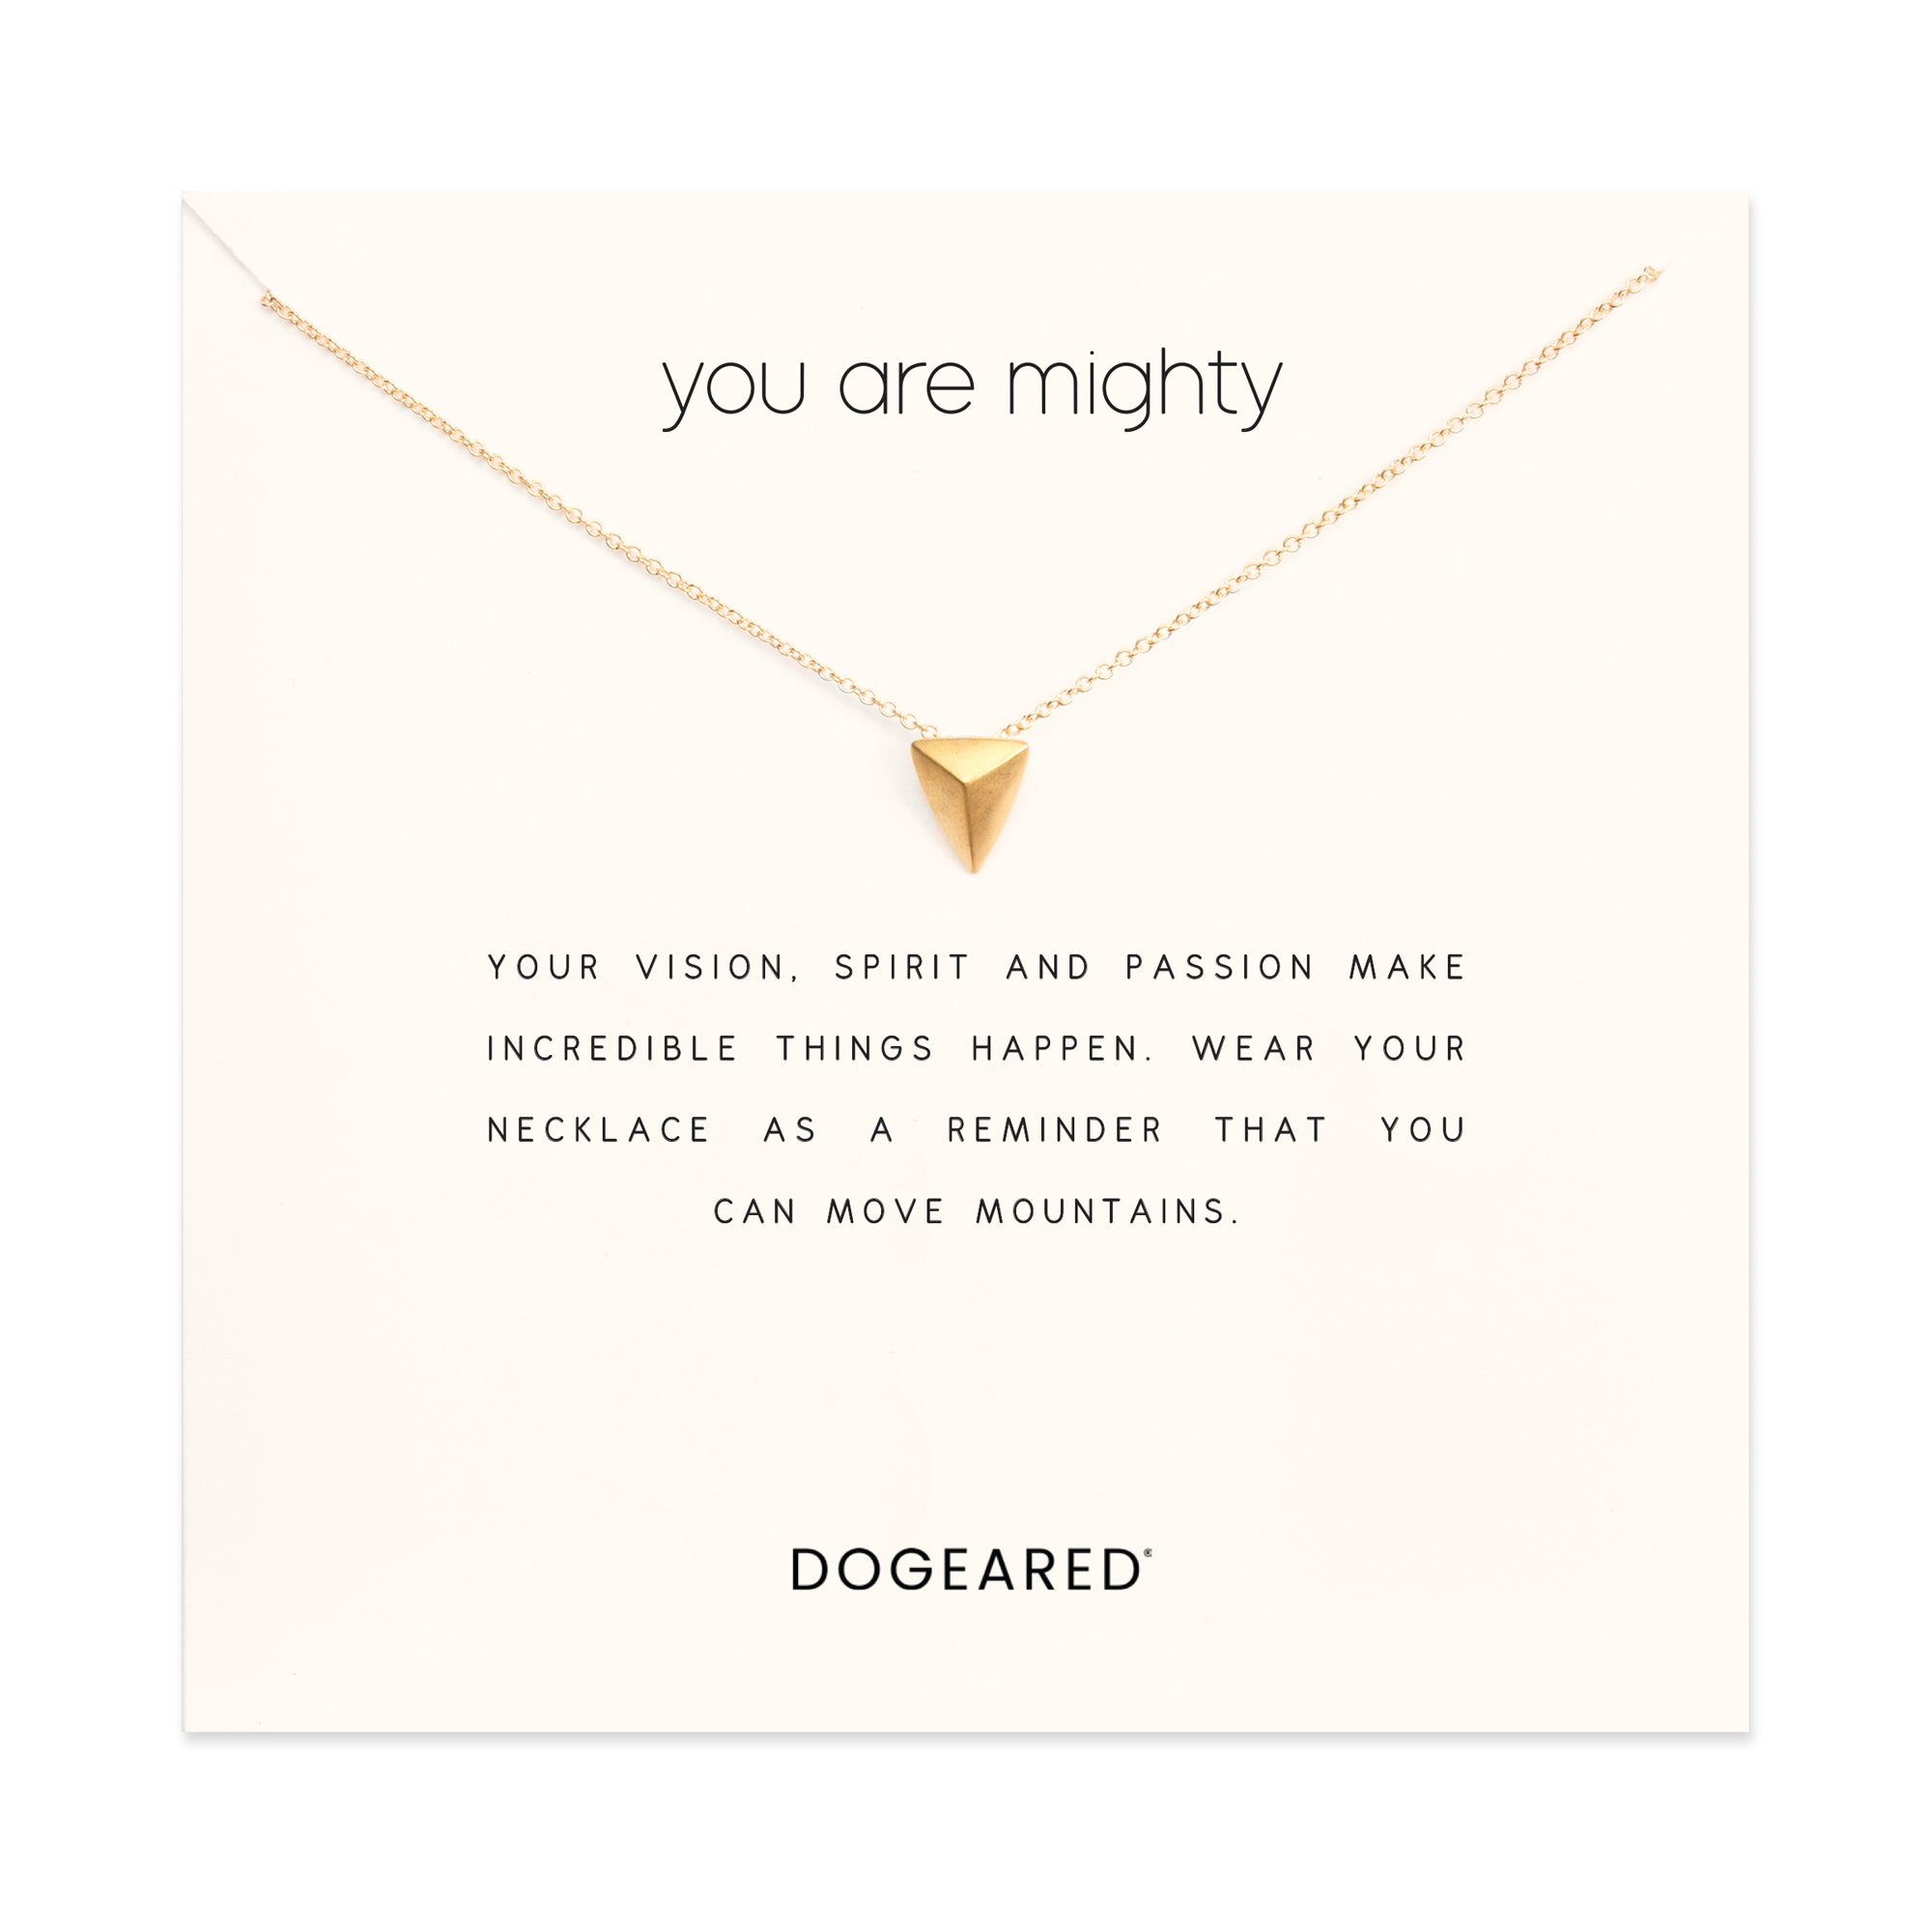 You are mighty pyramid necklace - Dogeared